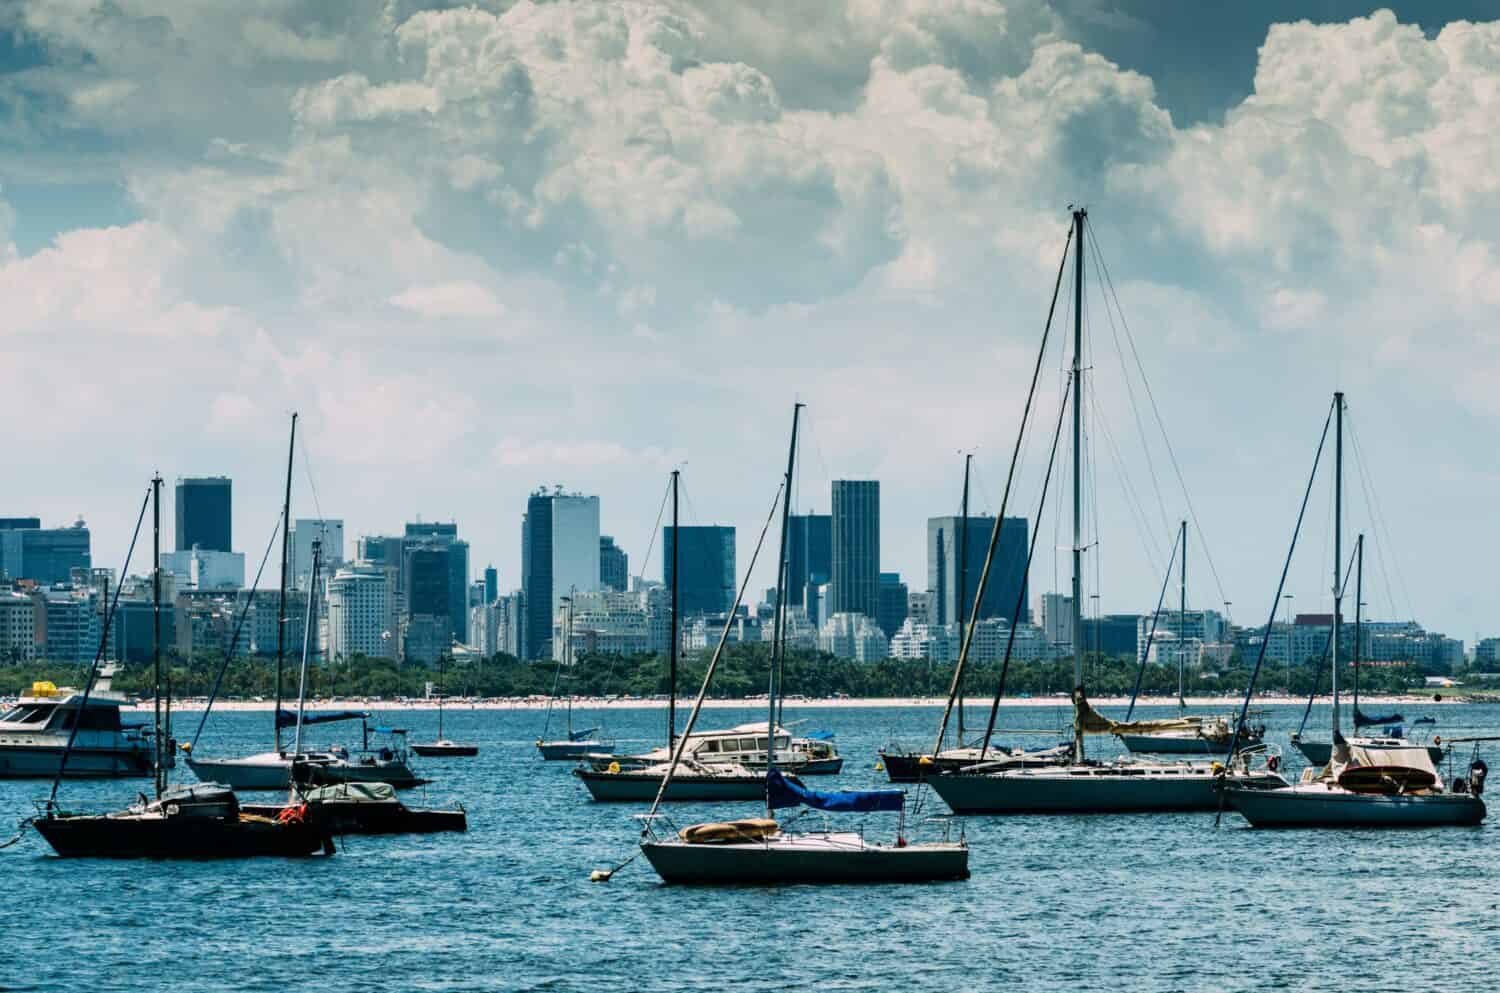 Scenic View of boats on Guanabara bay in Rio de Janeiro with skyline in the background